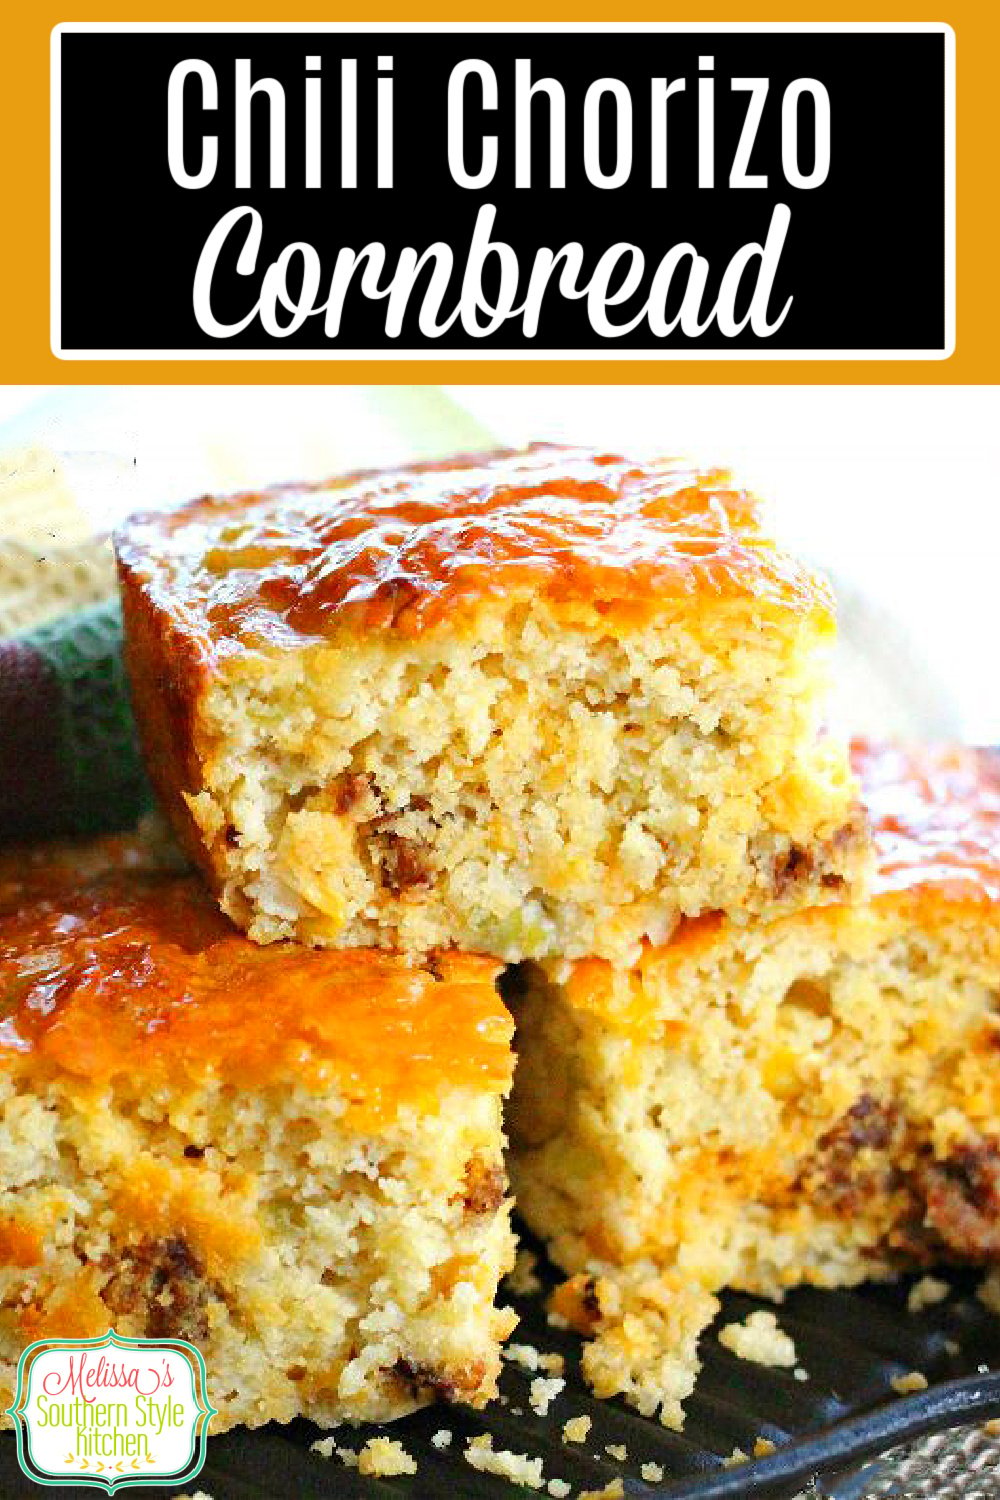 This flavorful Chili Chorizo Cornbread is sure to bring the heat to your dinner menu #cornbread #cornbreadrecipes #chorizo #chorizorecipes #sidedishrecipes #dinner #dinnerideas #southernfood #breadrecipes #southernrecipes via @melissasssk